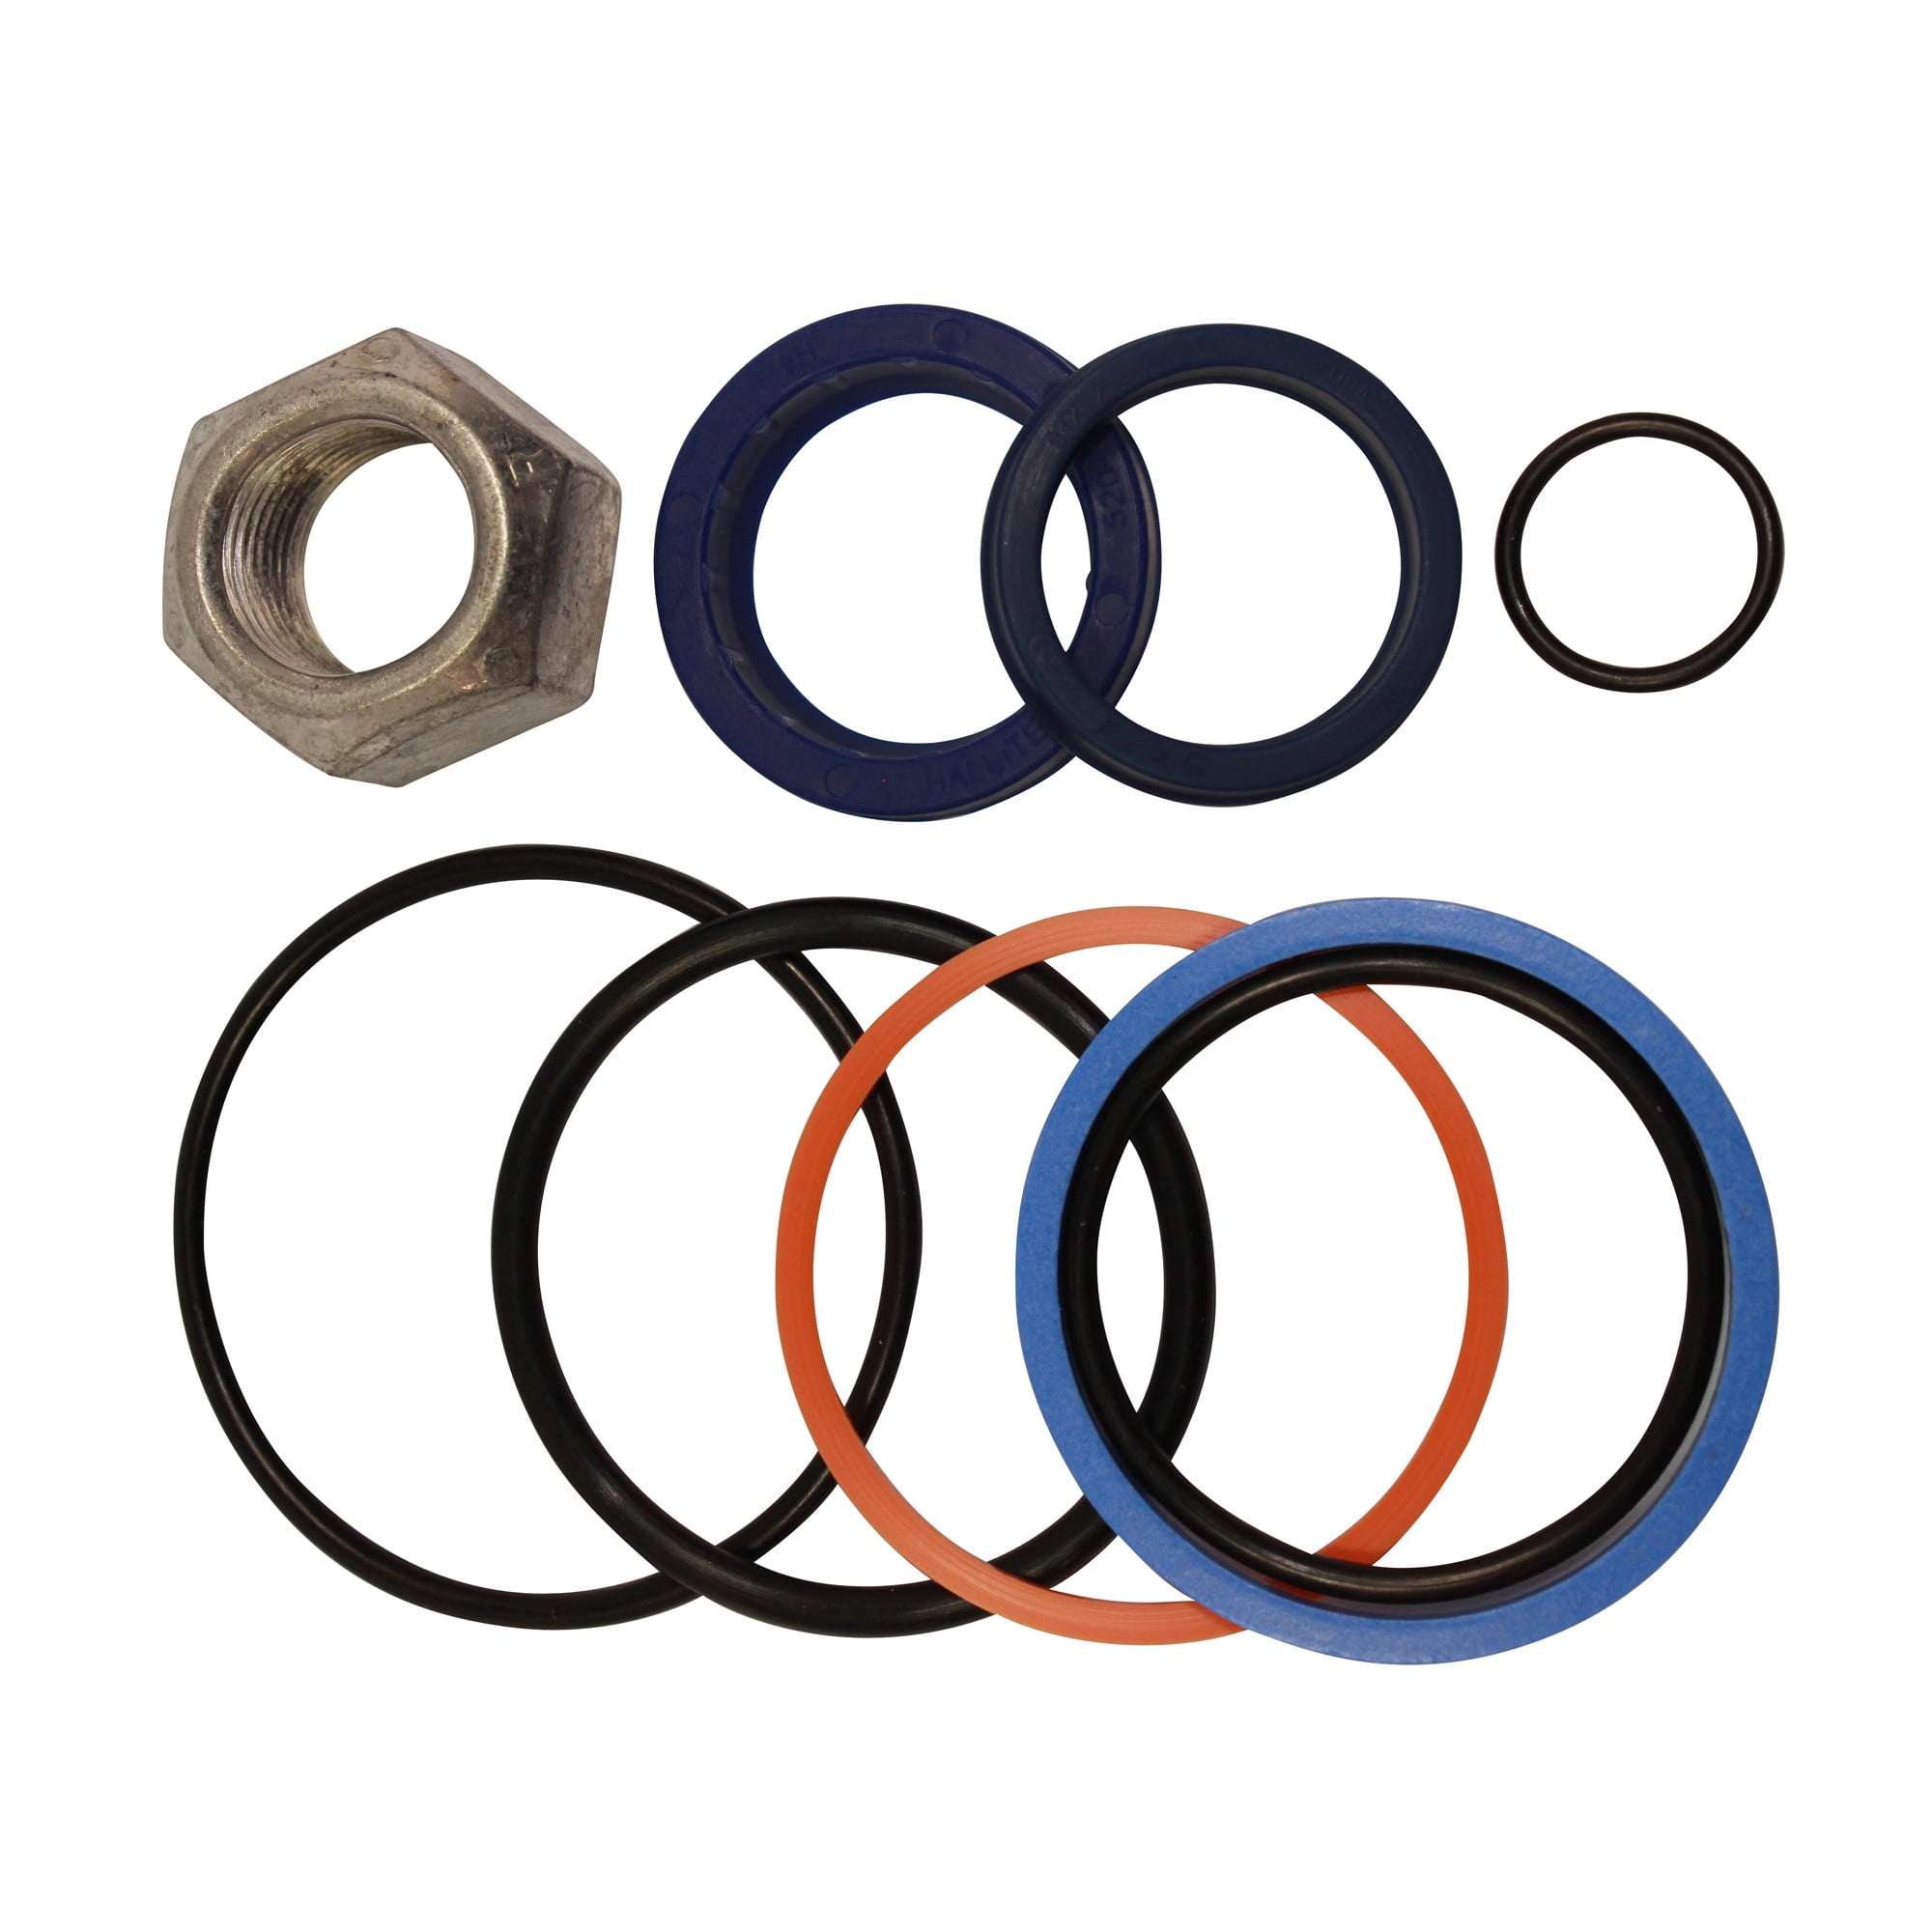 Tornado Heavy Equipment Parts Fits New Holland 85804740 Hydraulic Cylinder Seal Kit 